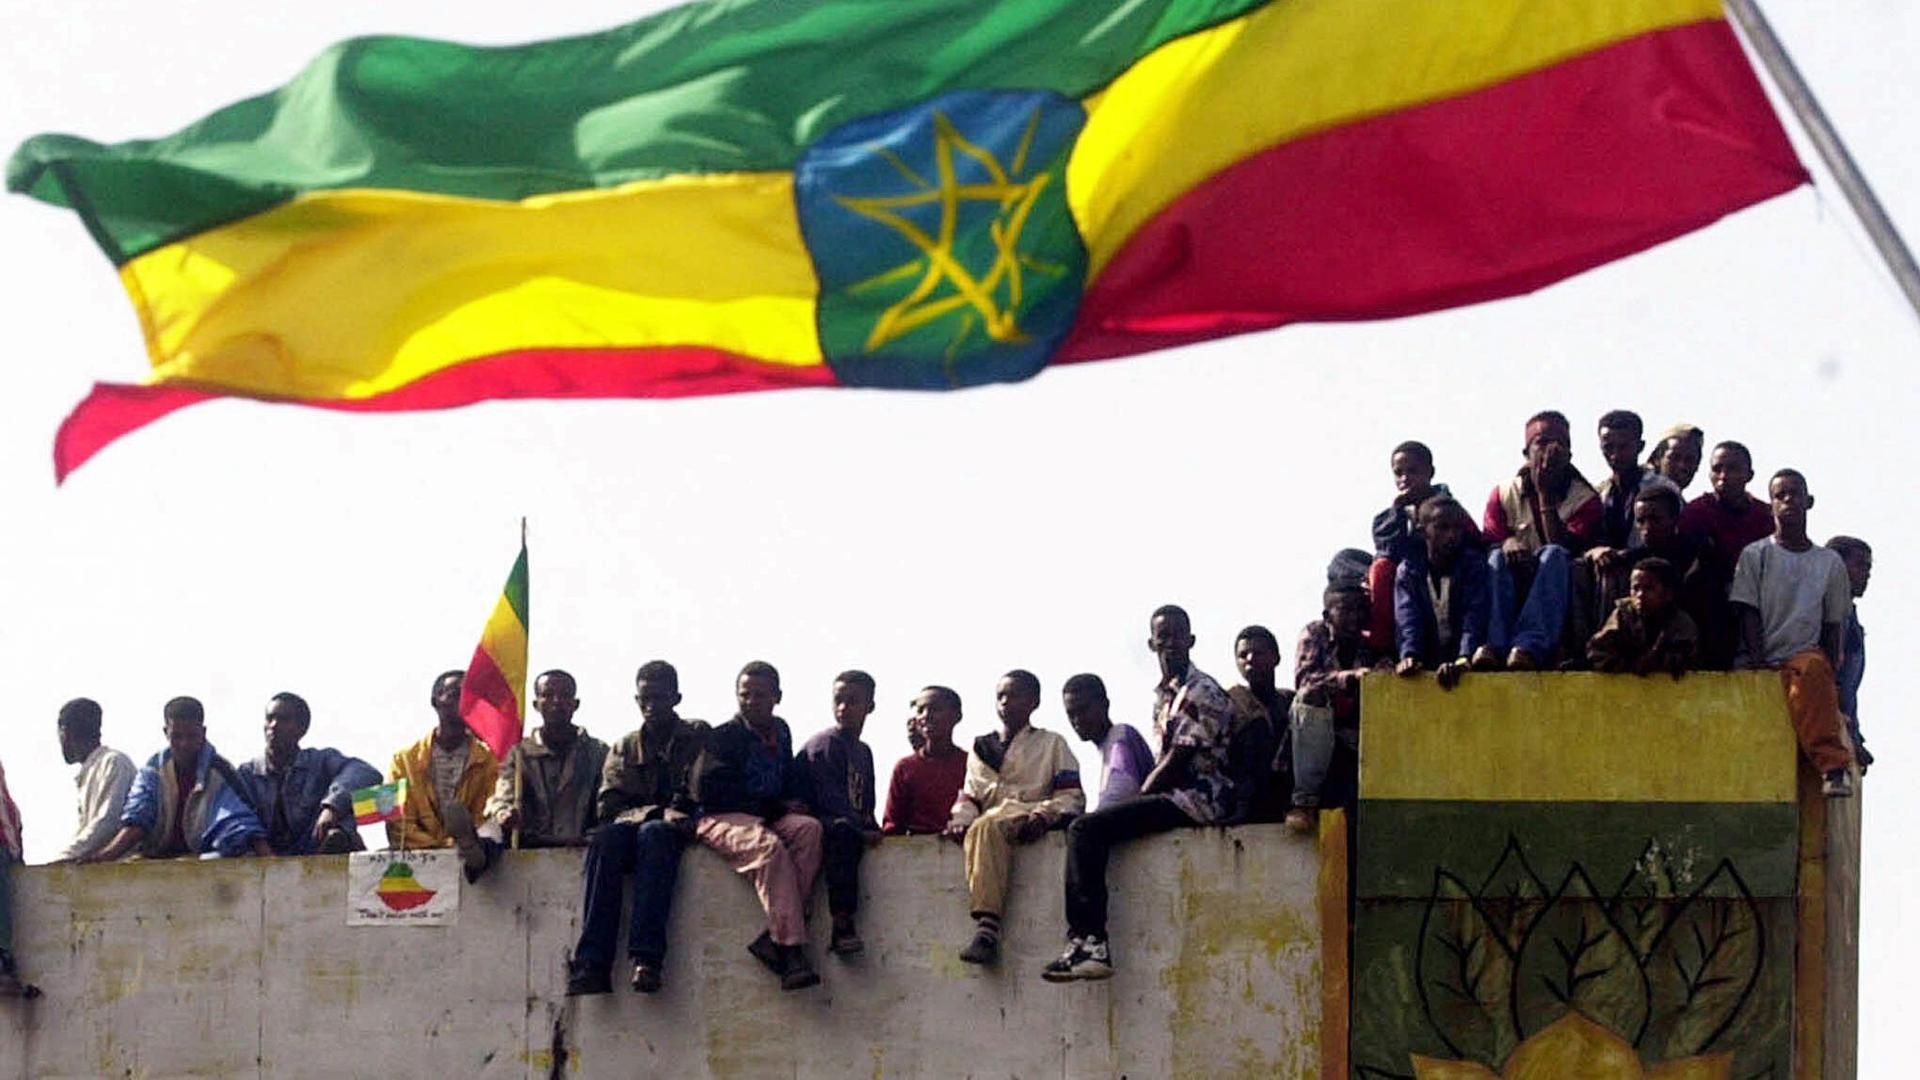 A huge flag of Ethiopia waves with people sitting underneath it